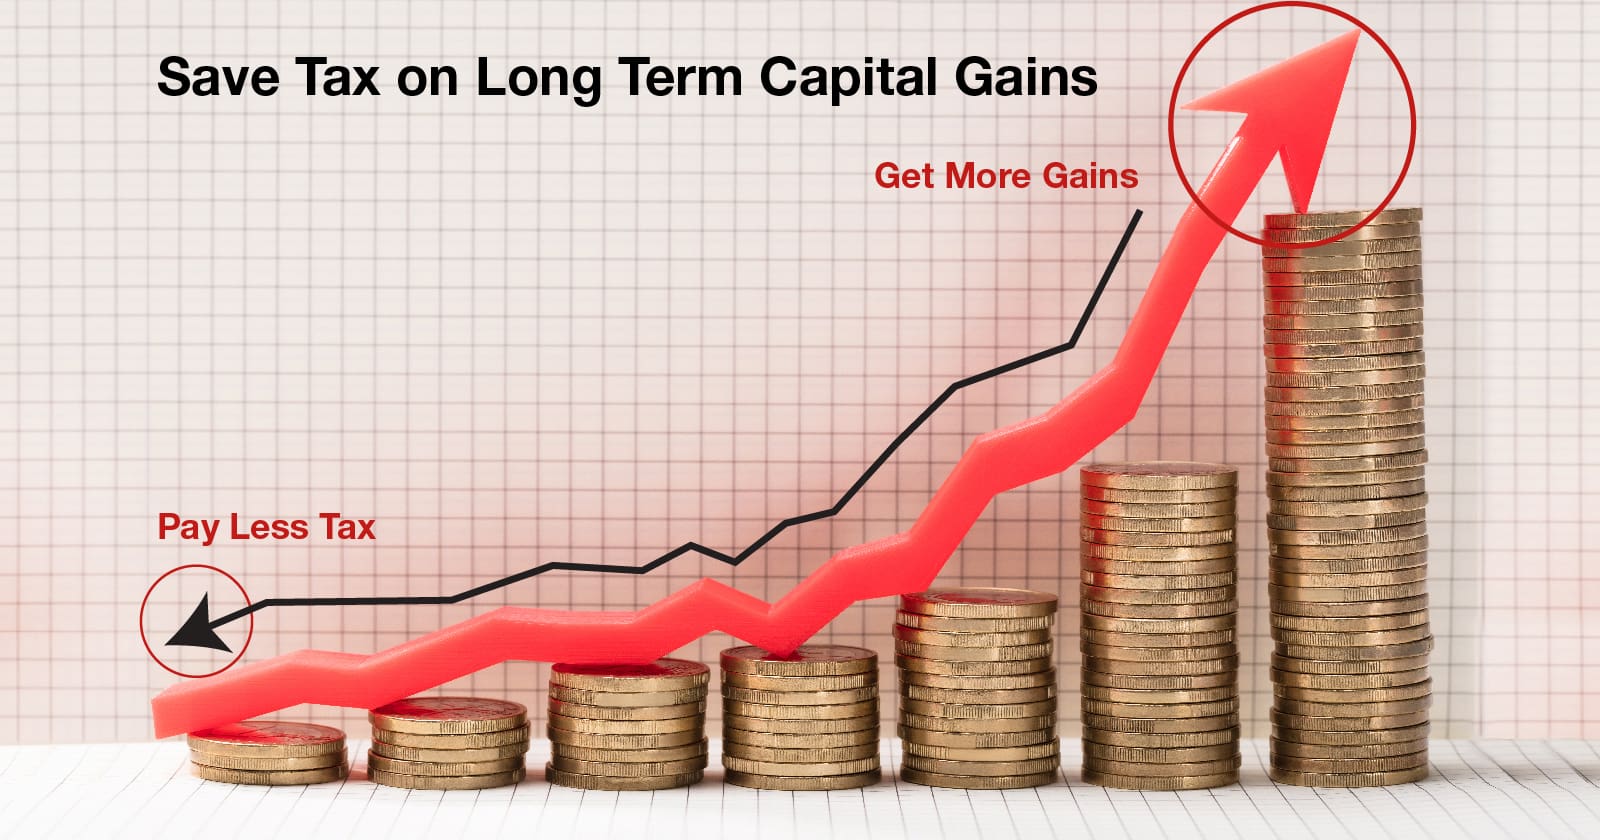 How to save tax on longterm capital gains?